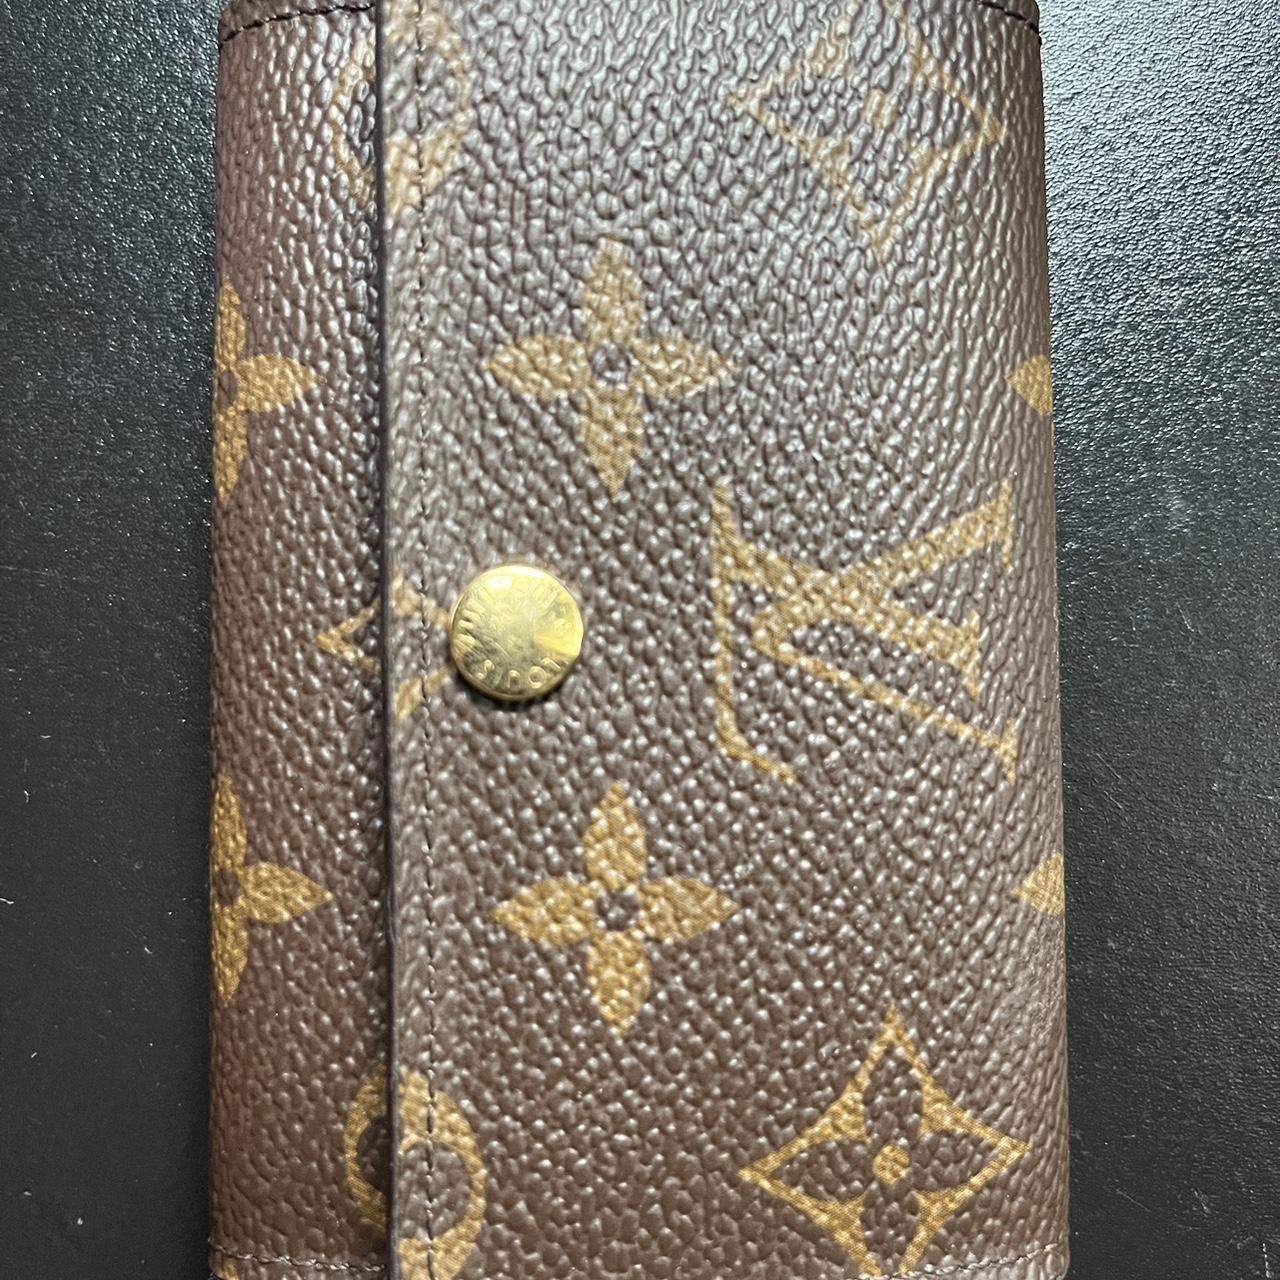 Louis Vuitton card holder. Bought 2 years ago so I - Depop